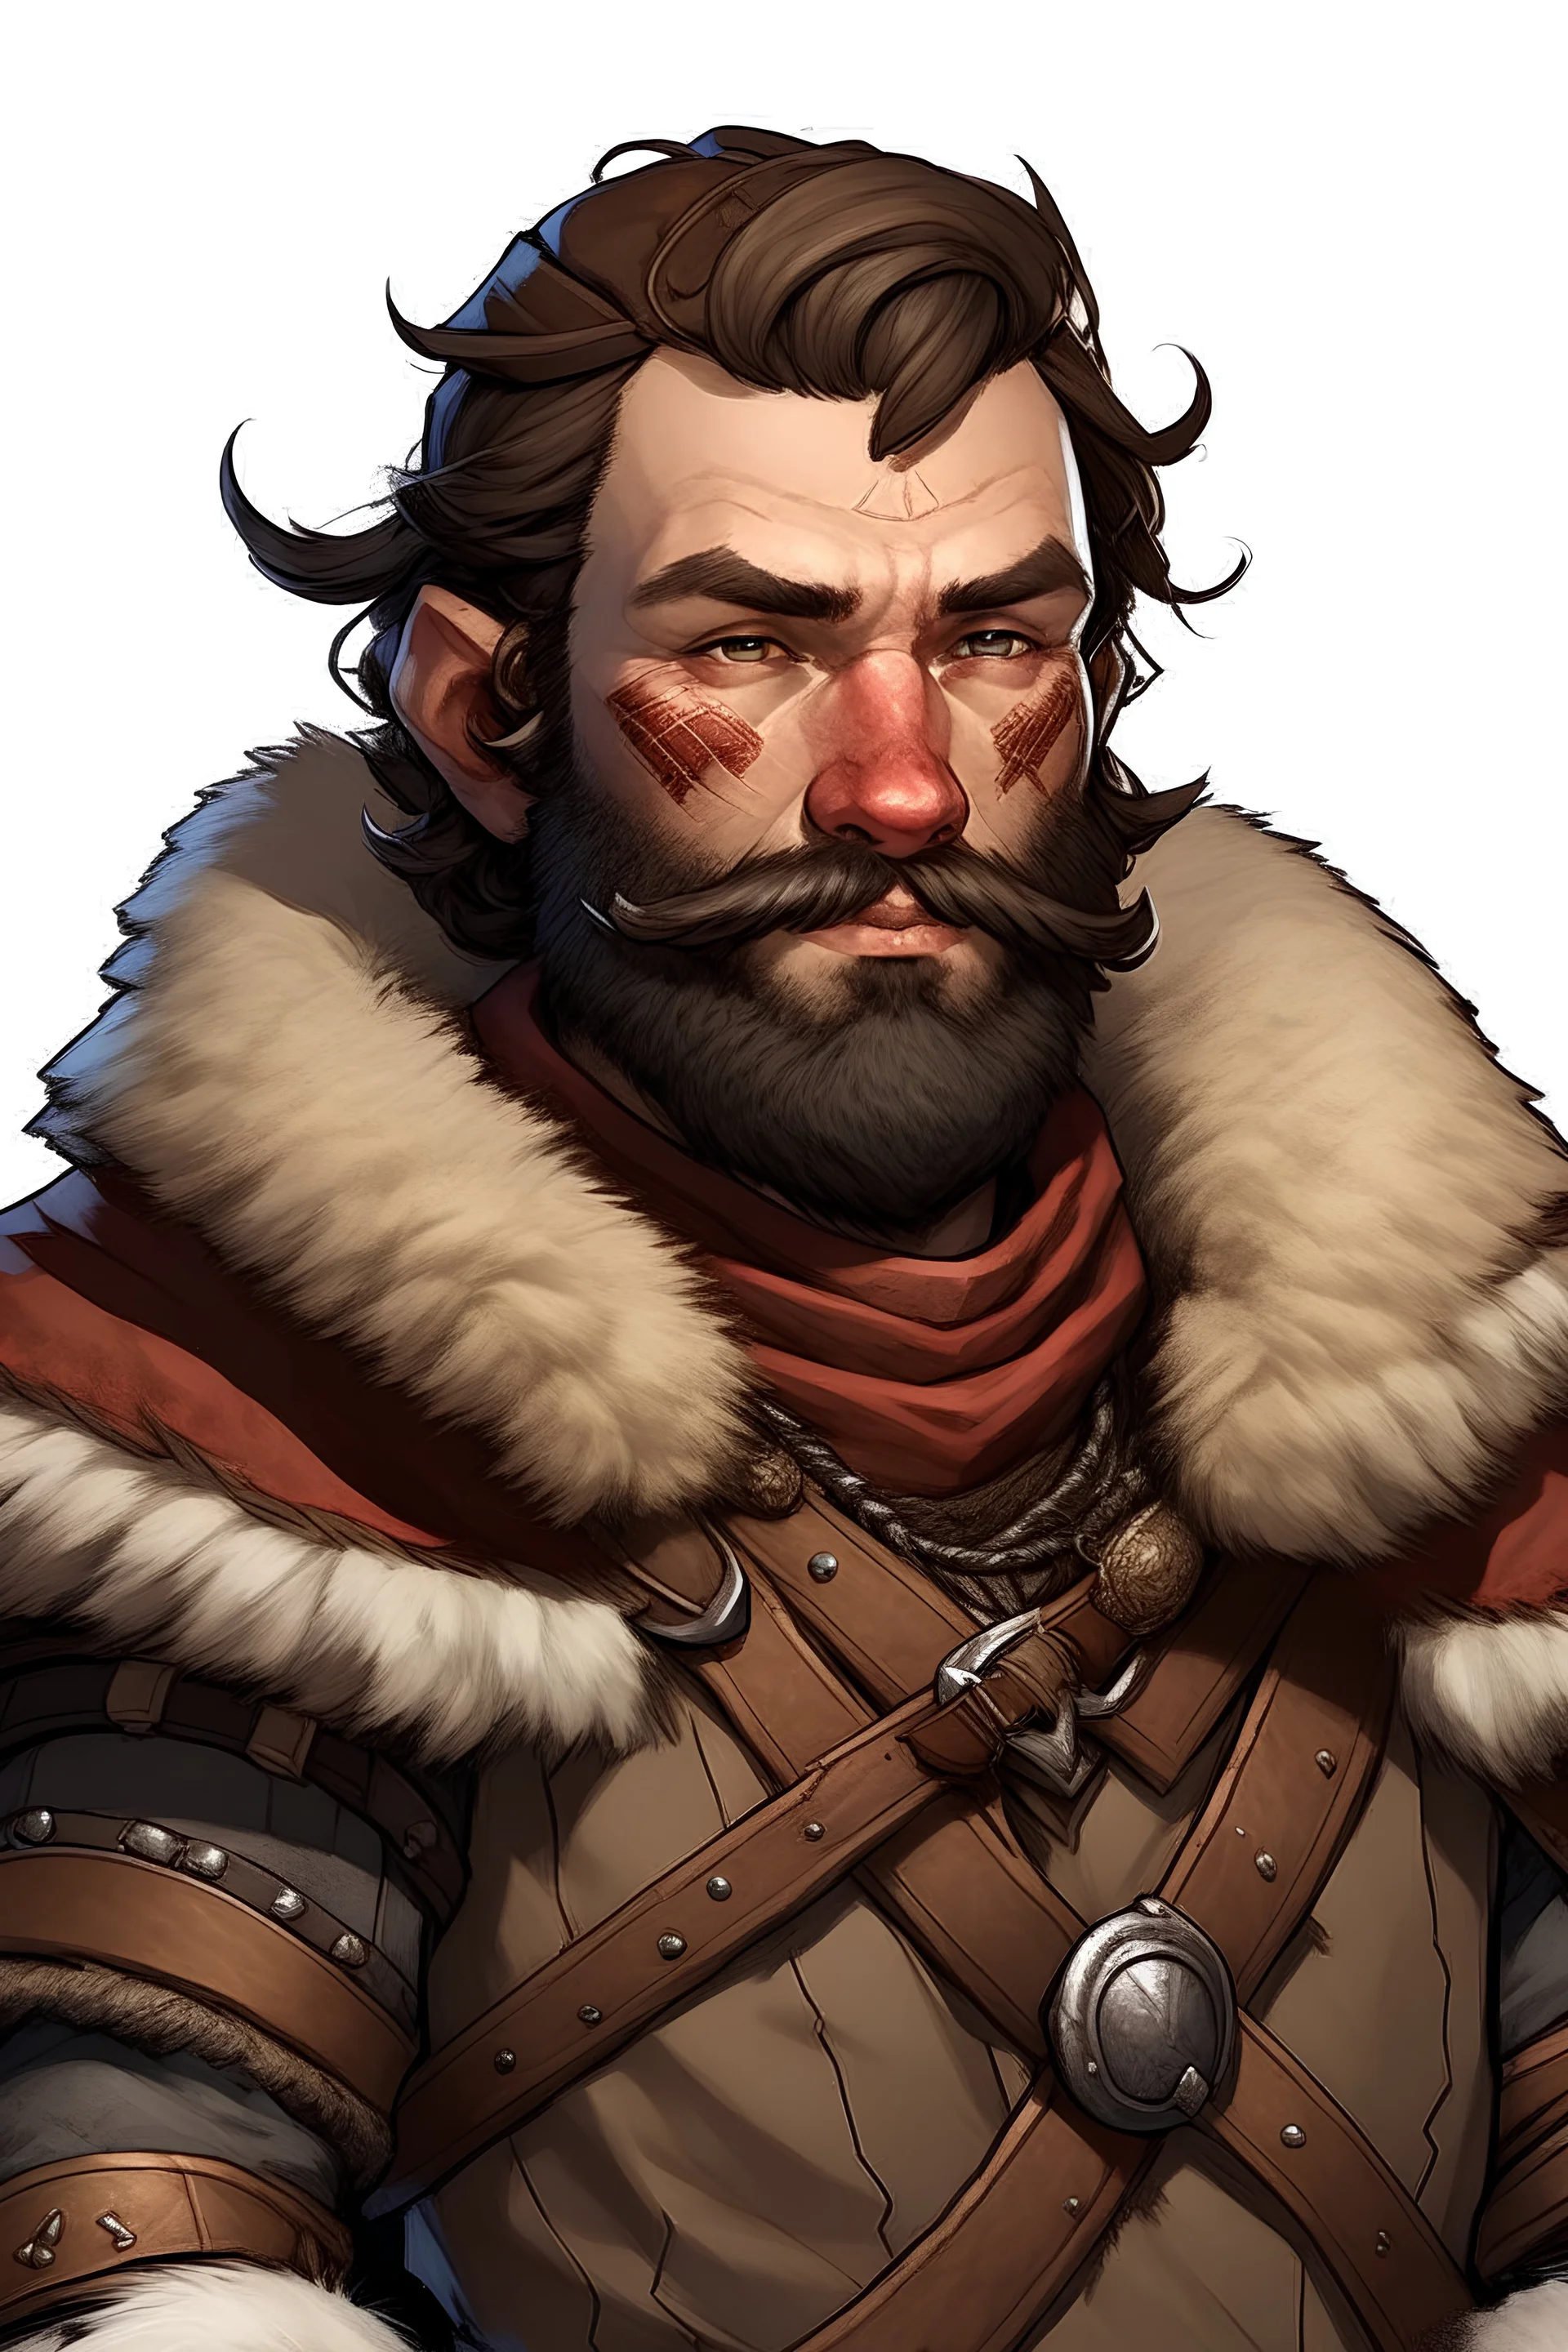 Dungeons and Dragons human barbarian with mutton chops, a stern look, and wearing winter clothes.